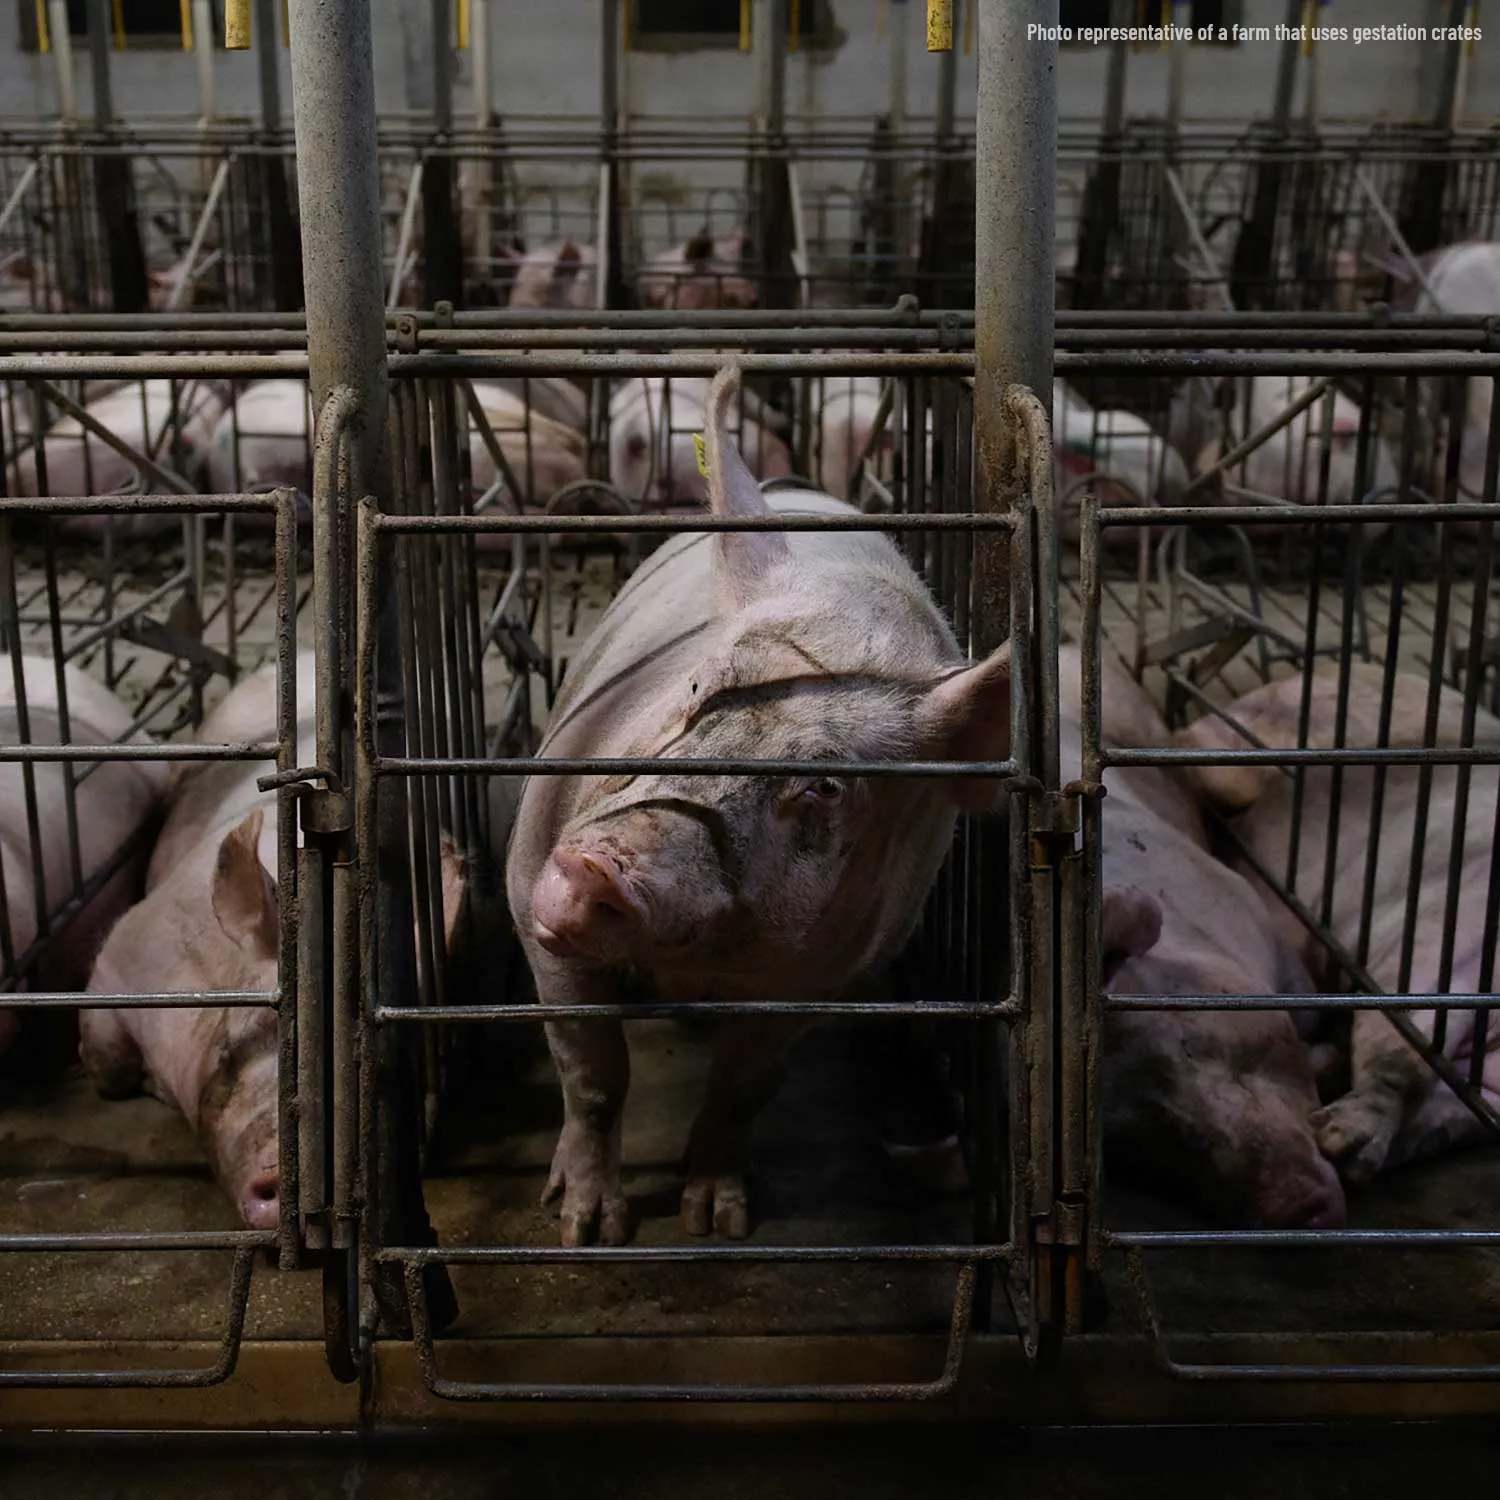 Denny’s faces mounting pressure to eliminate crates for pigs, Reuters reports